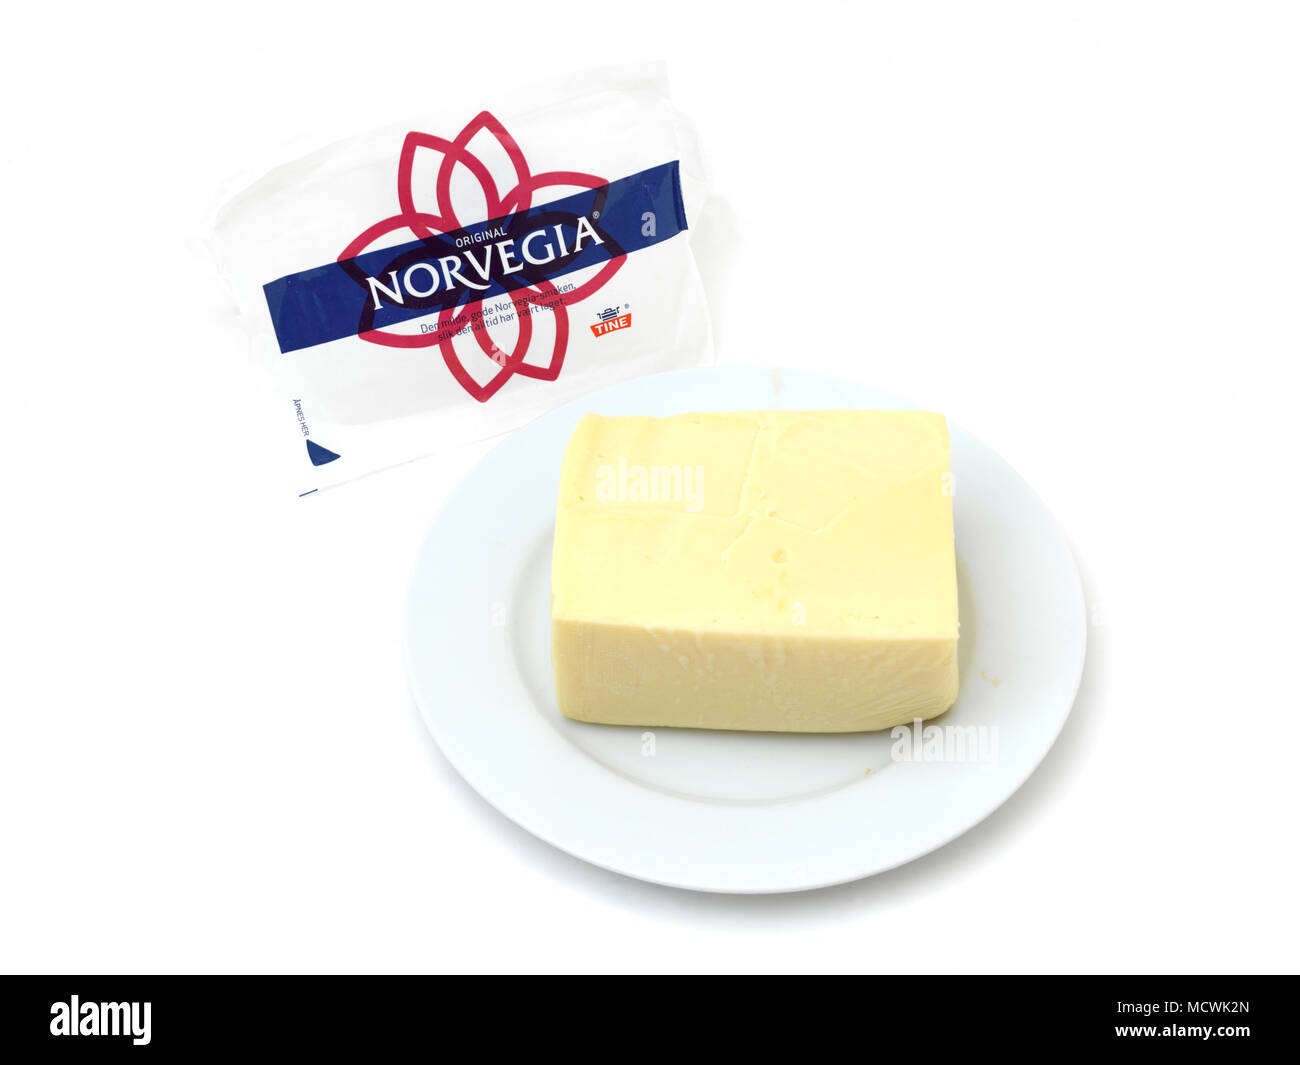 Norvegia Cheese From Norway On Plate Stock Photo